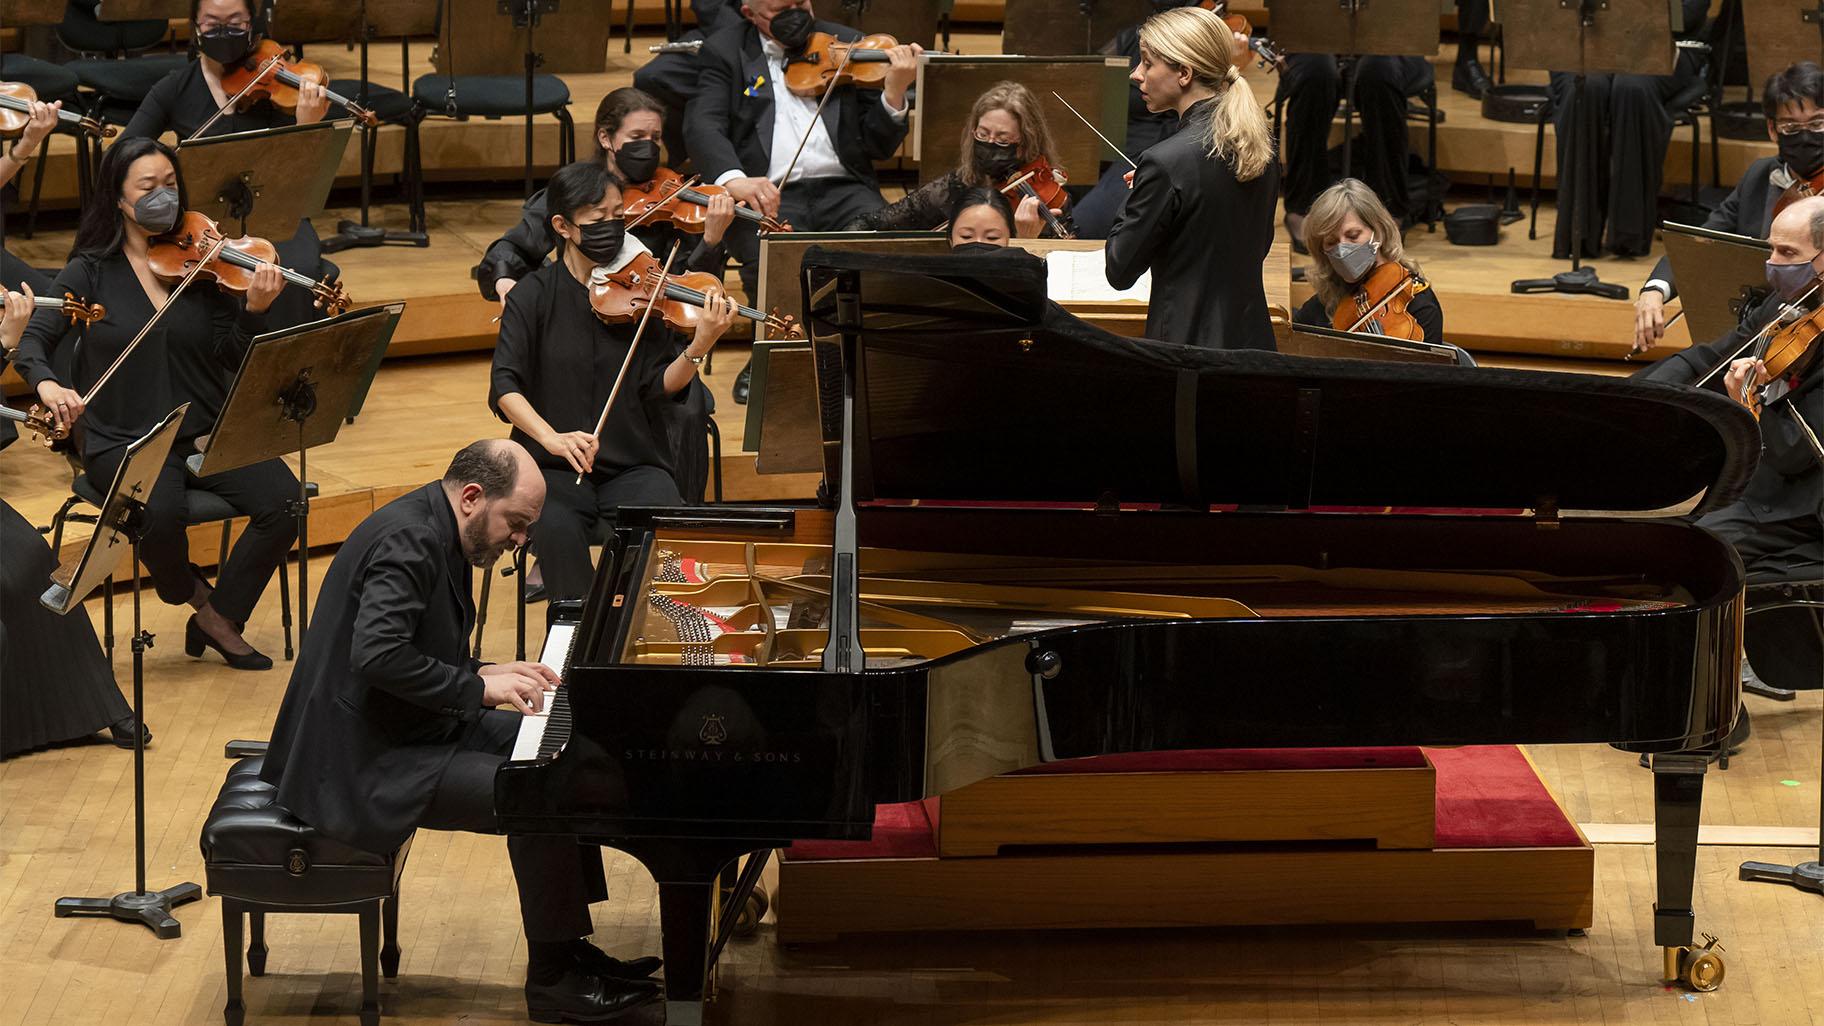 Kirill Gerstein joins the CSO and conductor Karina Canellakis in her CSO debut for a performance of Schumann’s Piano Concerto in A Minor (Credit: Todd Rosenberg Photography)